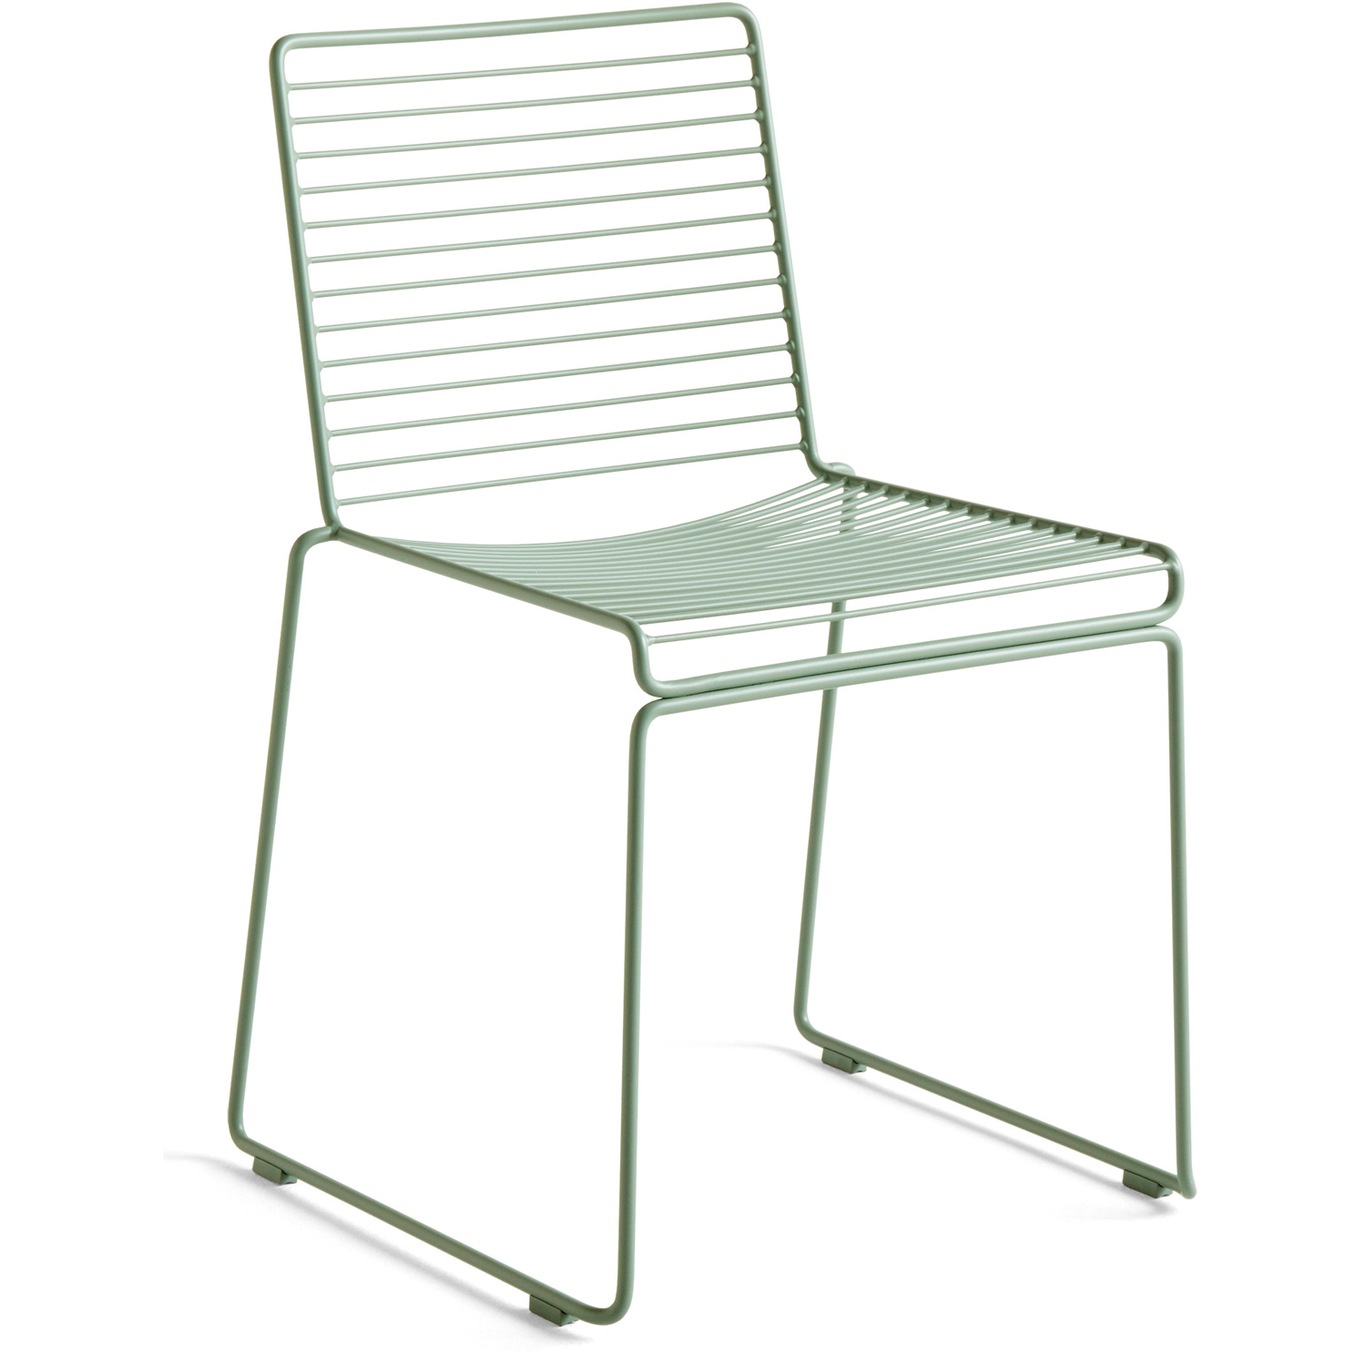 Hee Dining Chair, Fall green